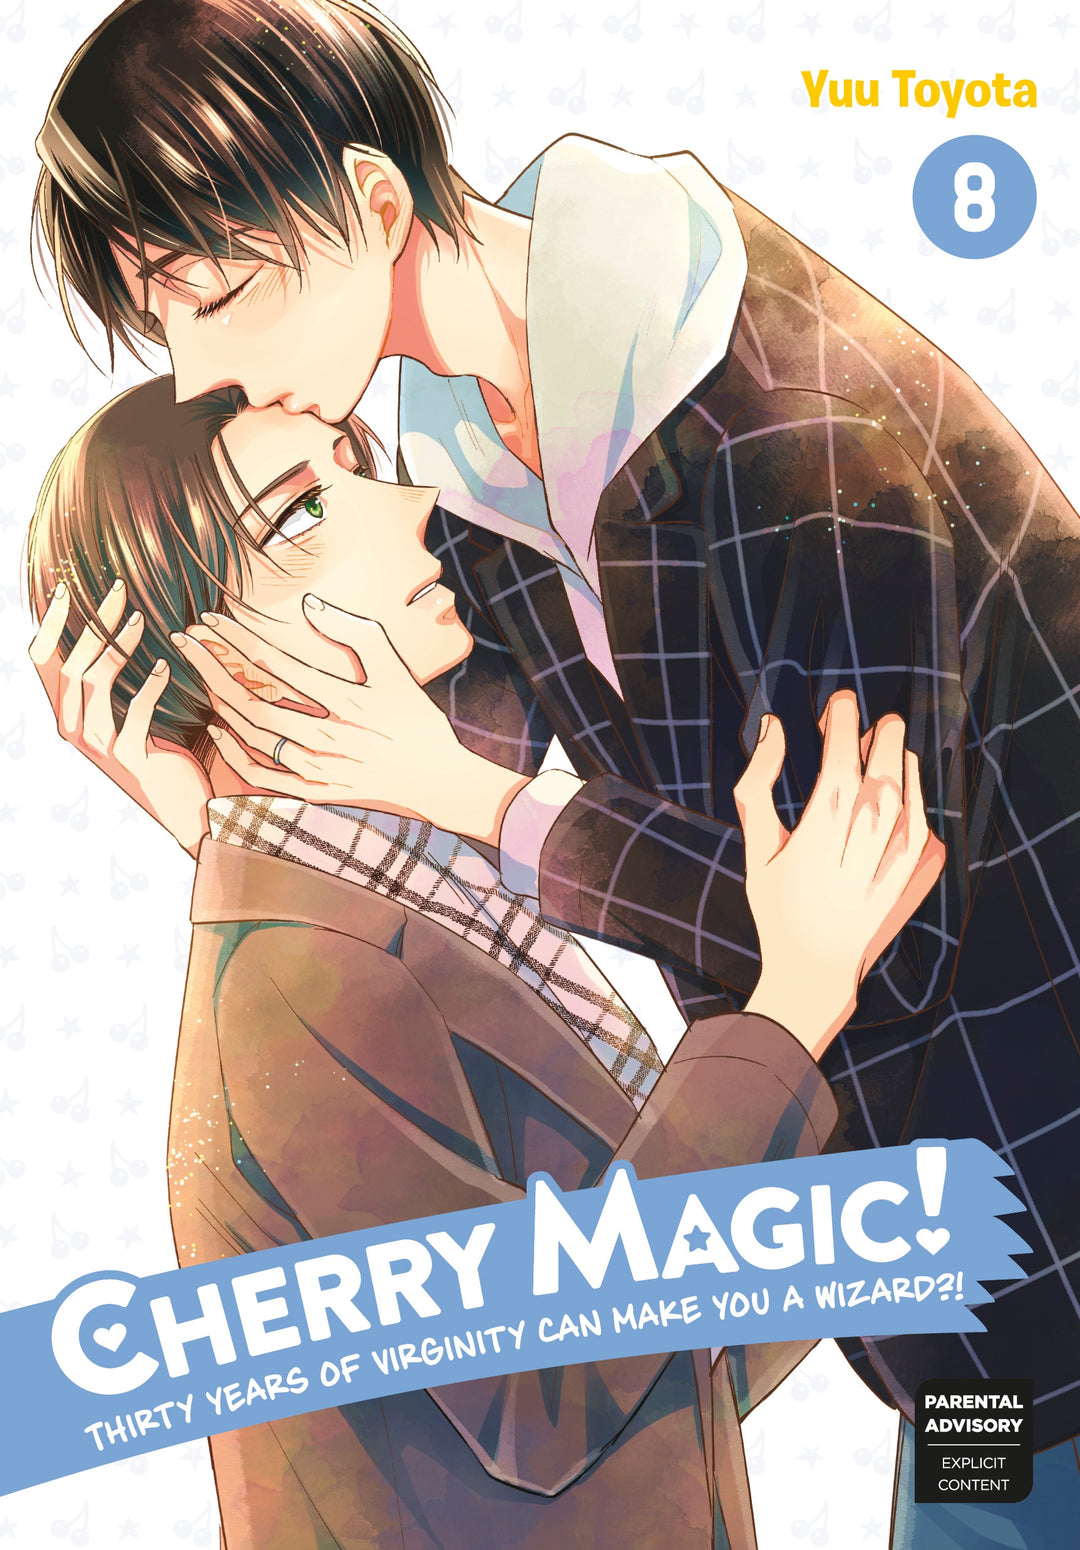 Cherry Magic! Thirty Years of Virginity Can Make You a Wizard?!, Vol. 08